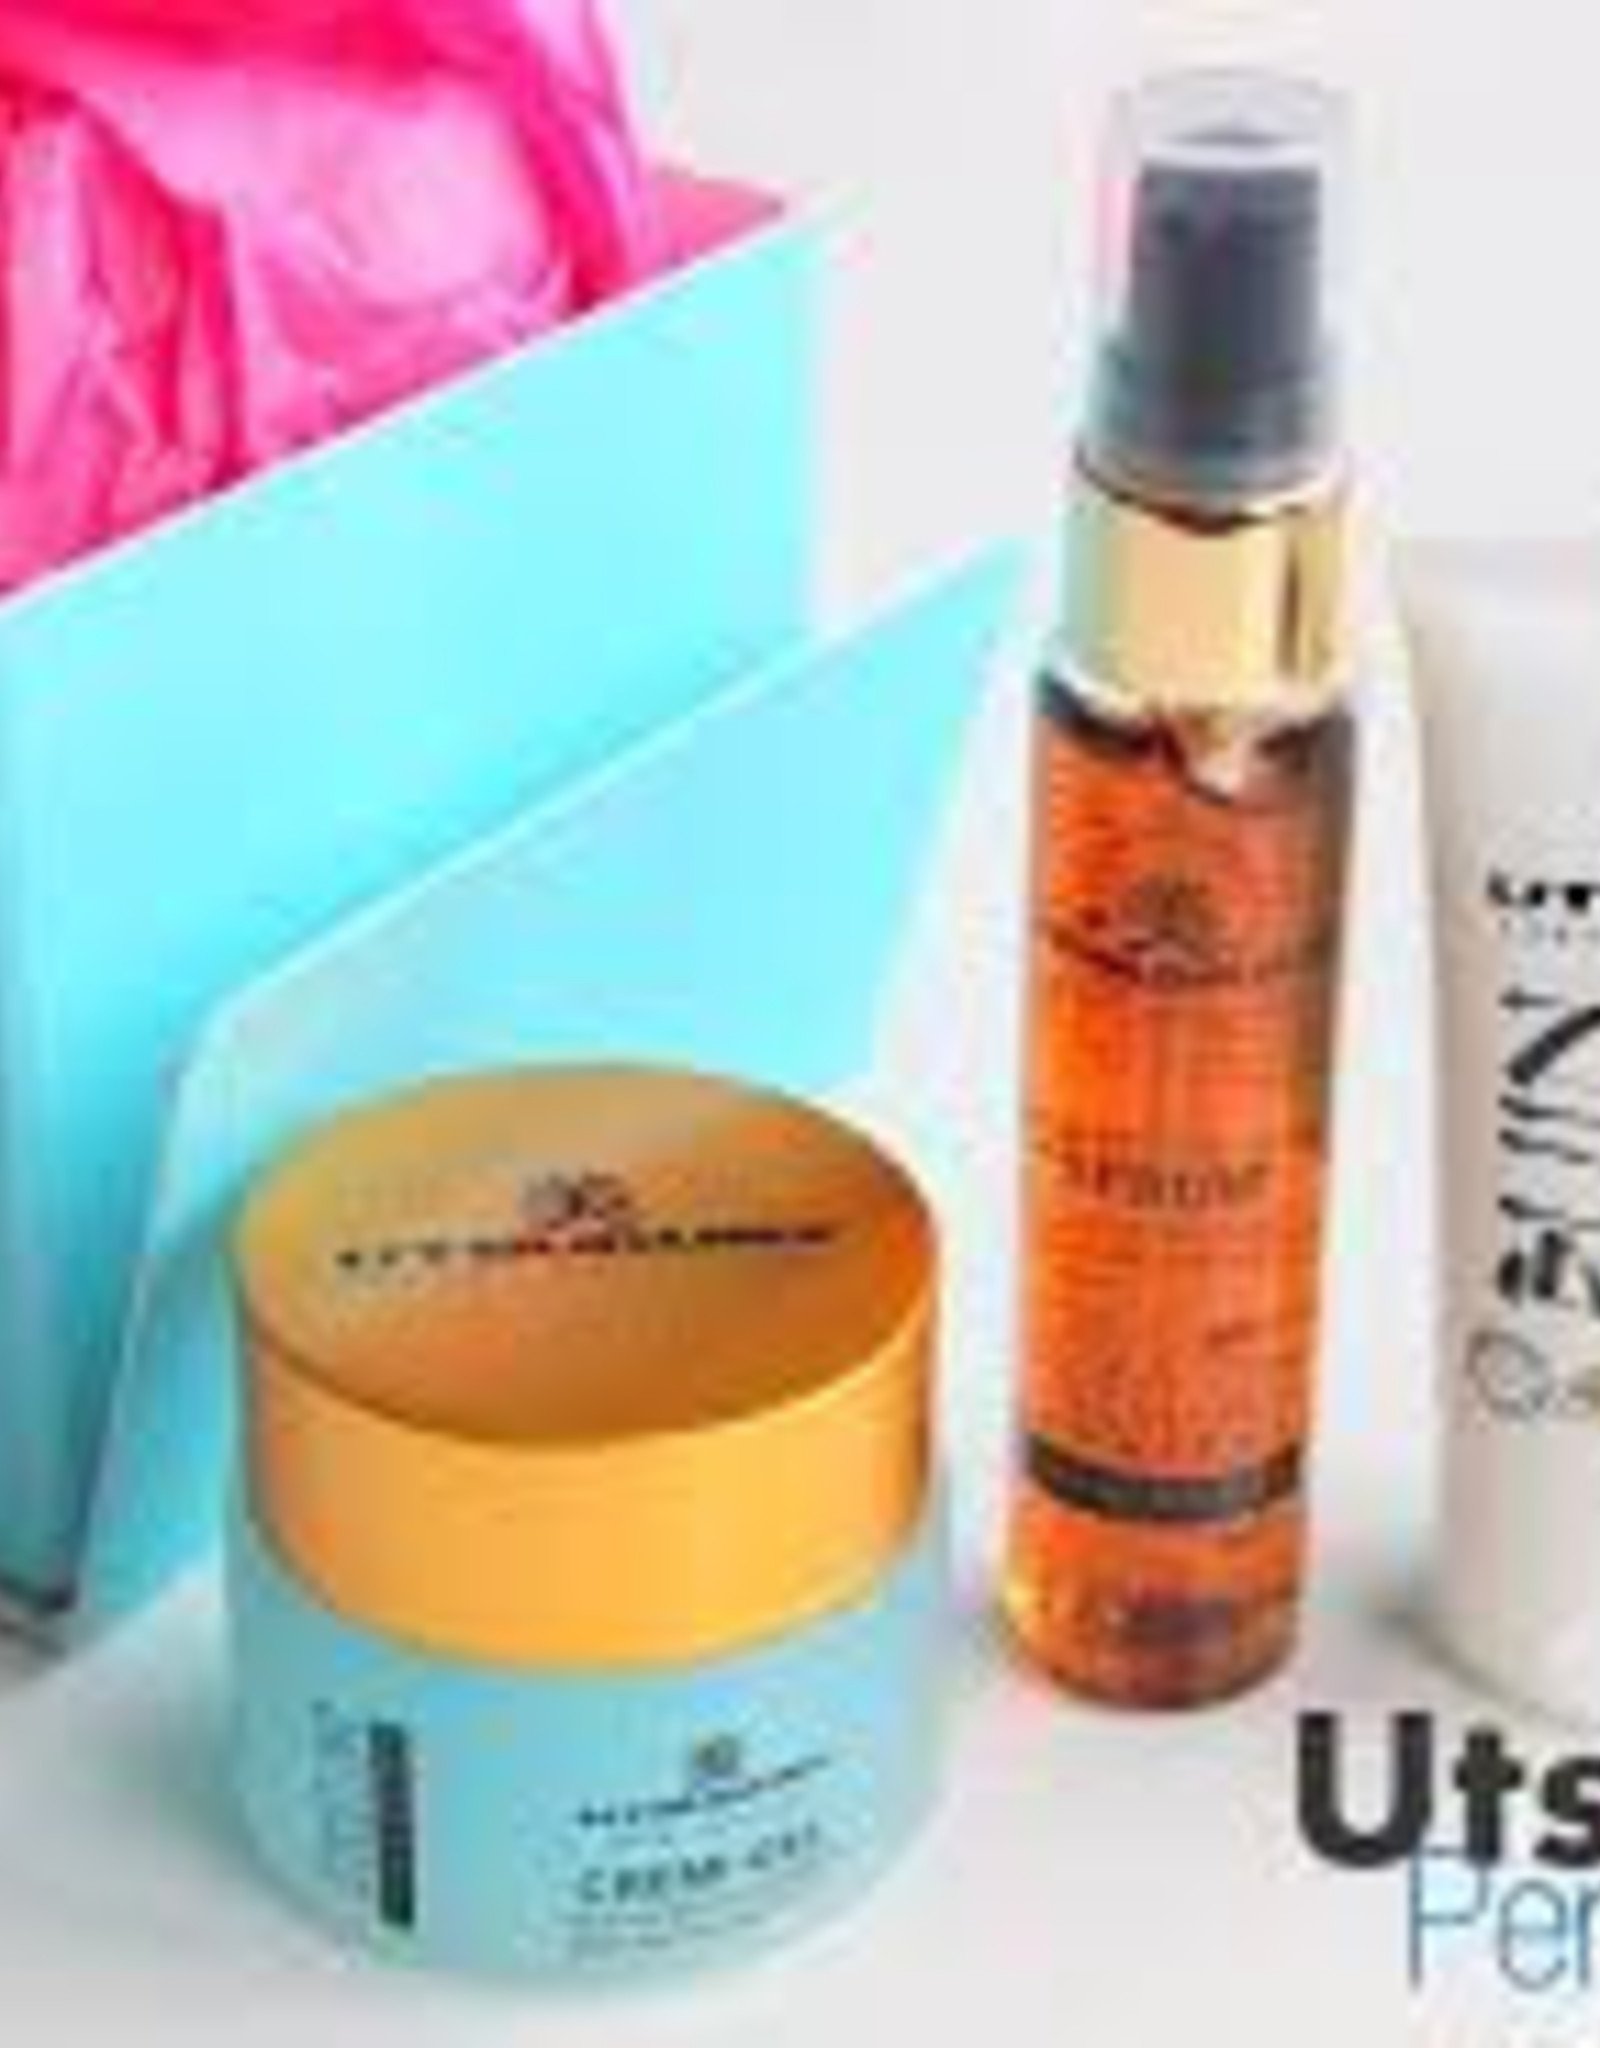 Utsukusy Perfect Skin home care kit